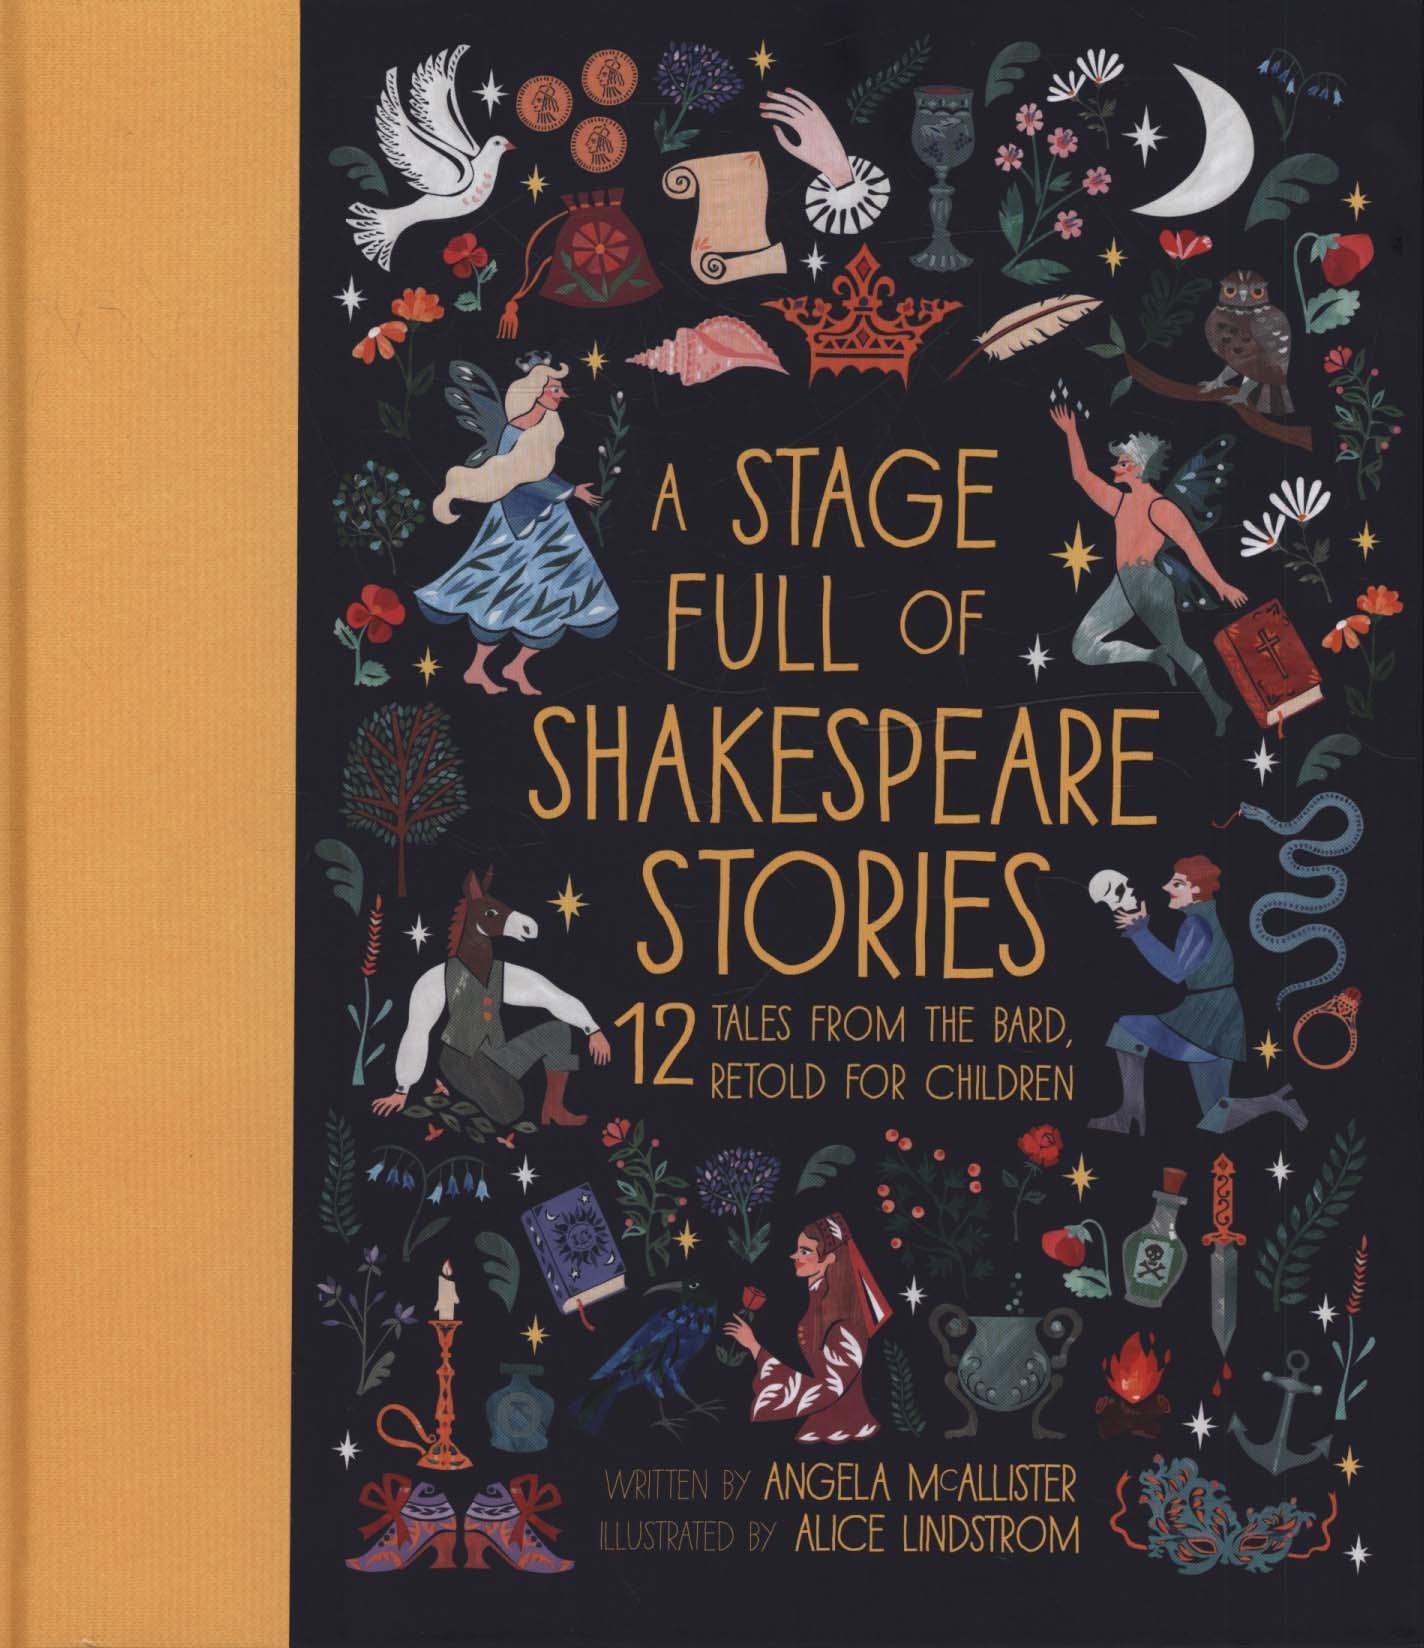 Stage Full of Shakespeare Stories